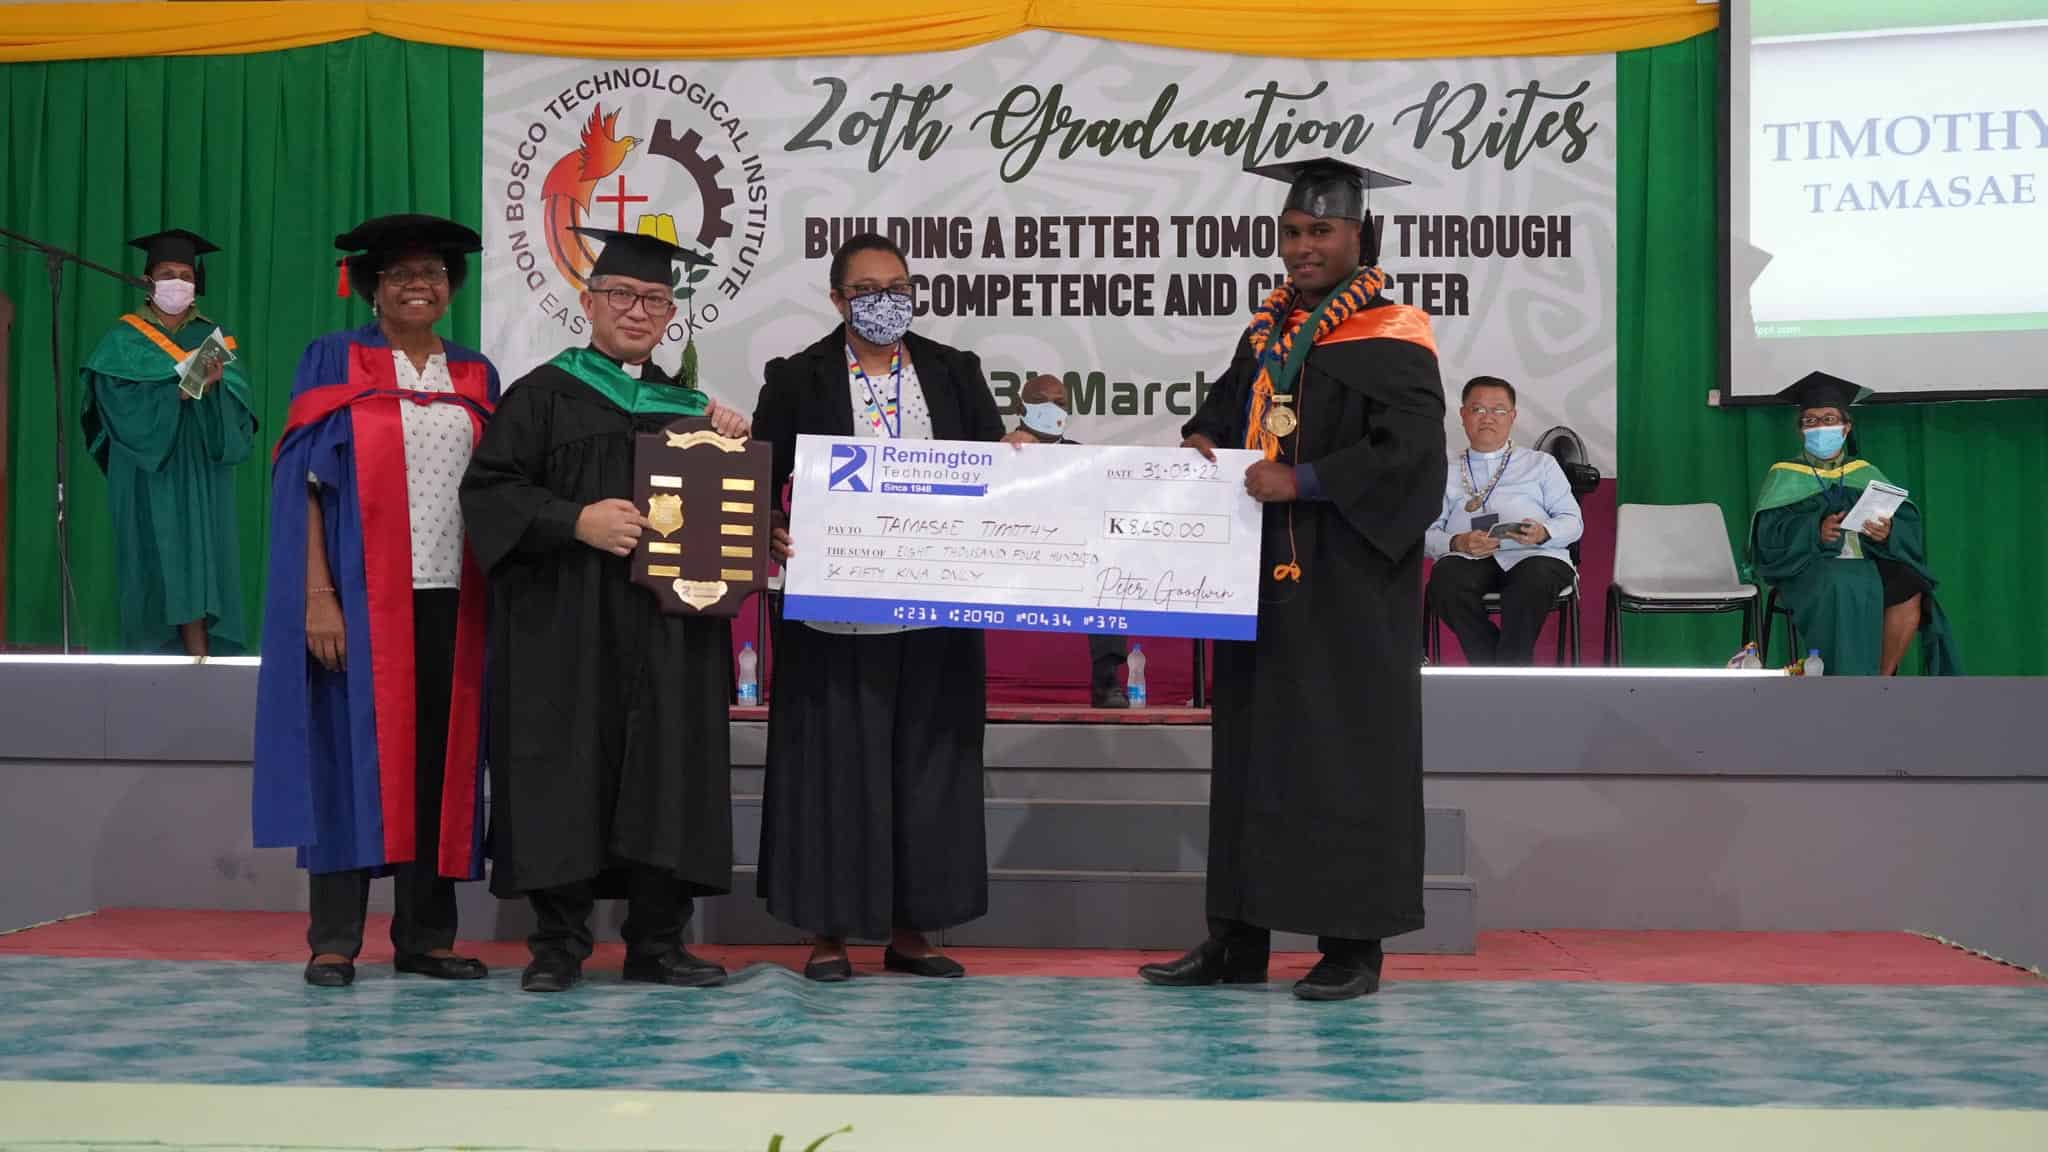 Tamasae Timothy, student of Bachelor’s in Automotive Technology from  Don Bosco Technological Institute received the “Best in Technology” award from the Remington Group, Papua New Guinea